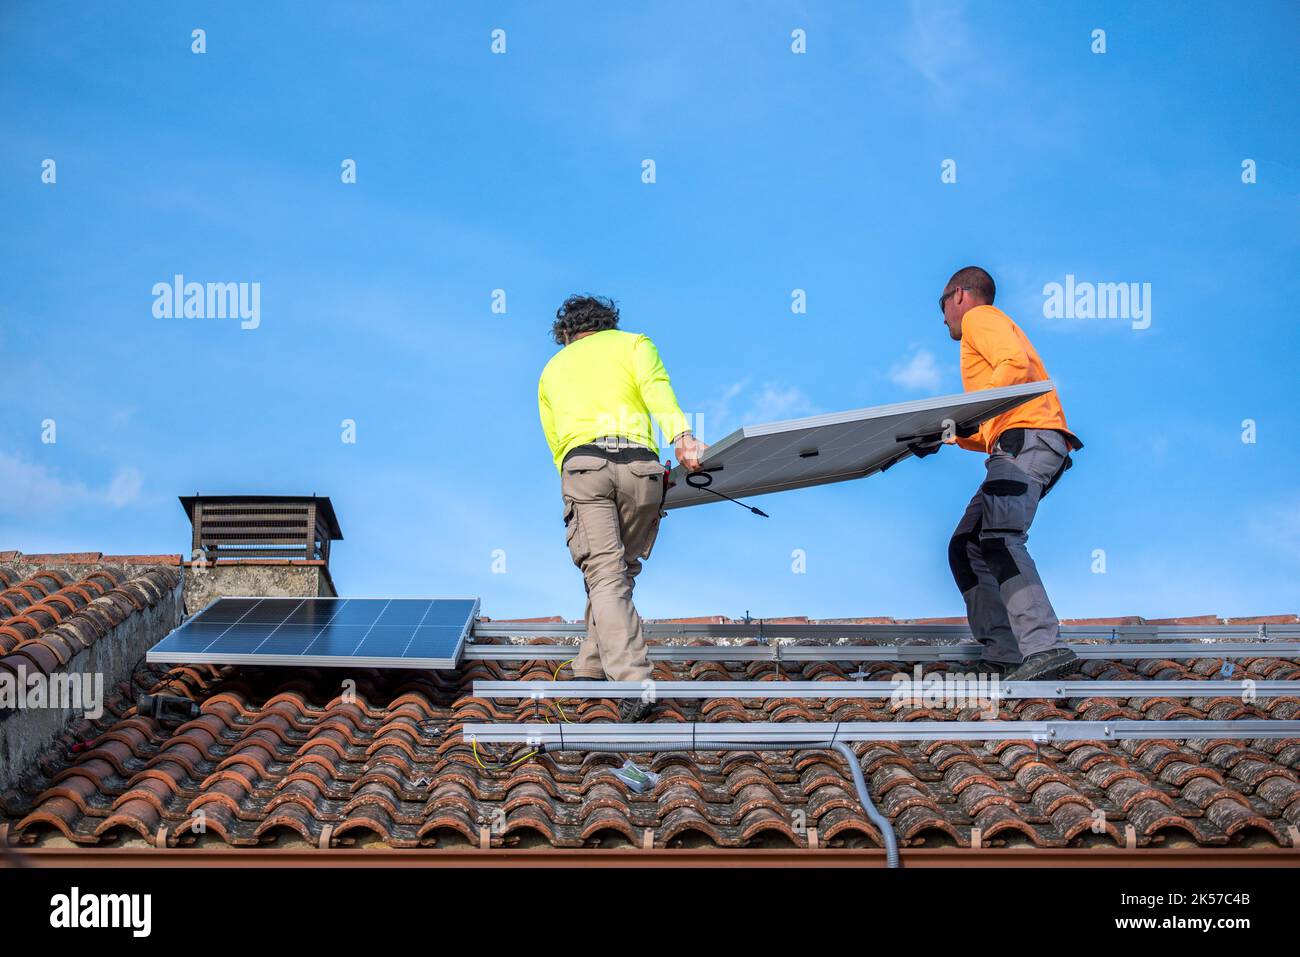 Roof with two people installing solar panels and a blue sky with white clouds in the background. Stock Photo